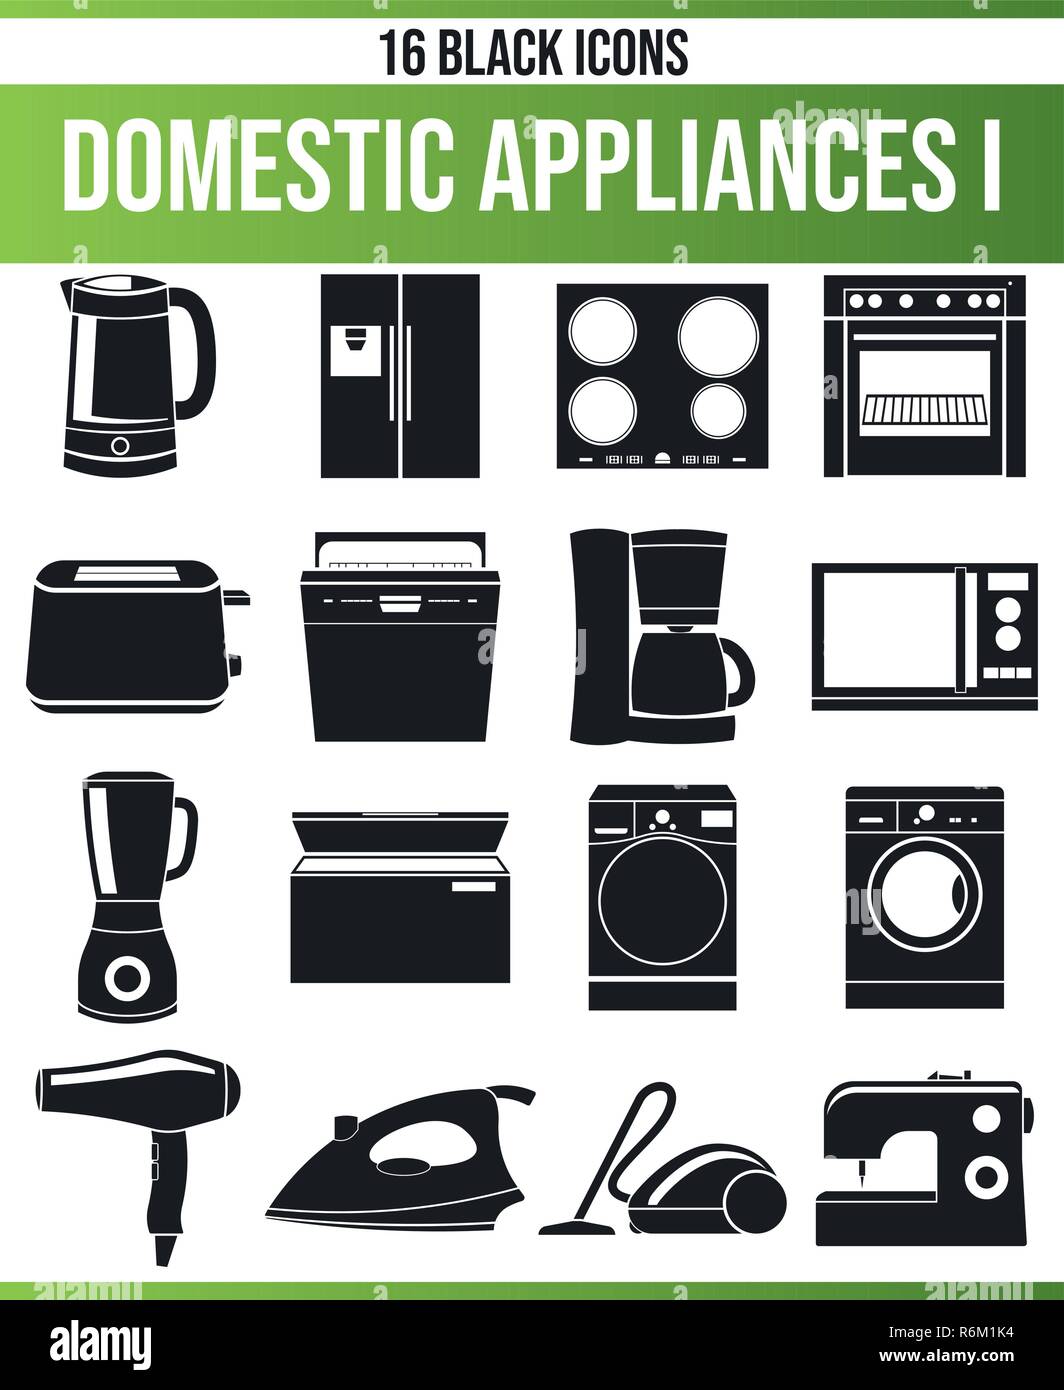 Black pictograms / icons on home appliances. This icon set is perfect for creative people and designers who need the issue of household appliances in  Stock Vector